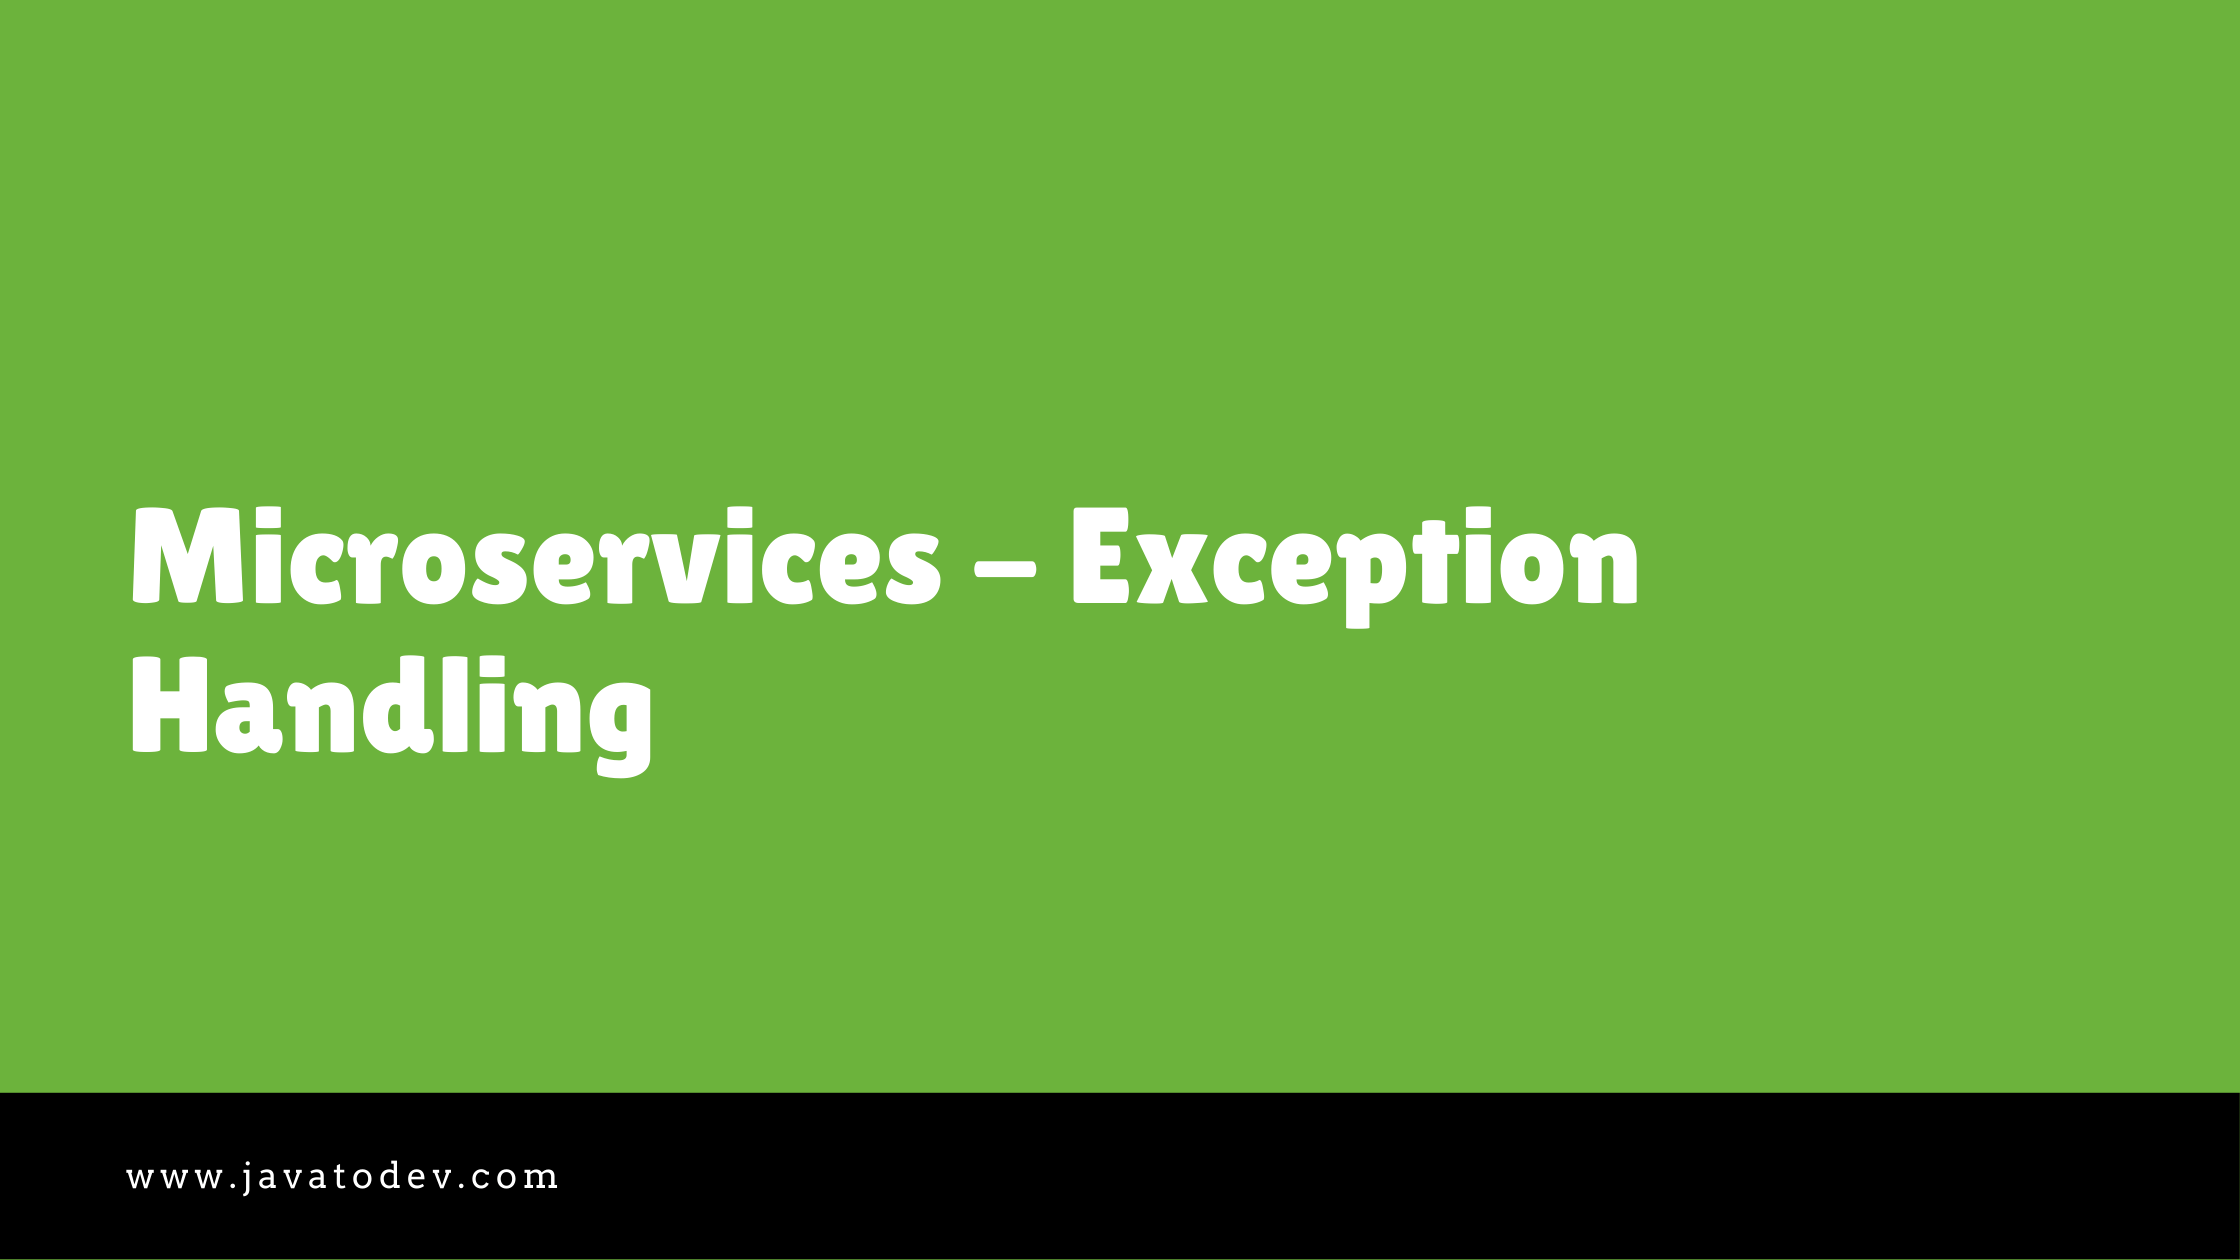 Microservices - Exception Handling